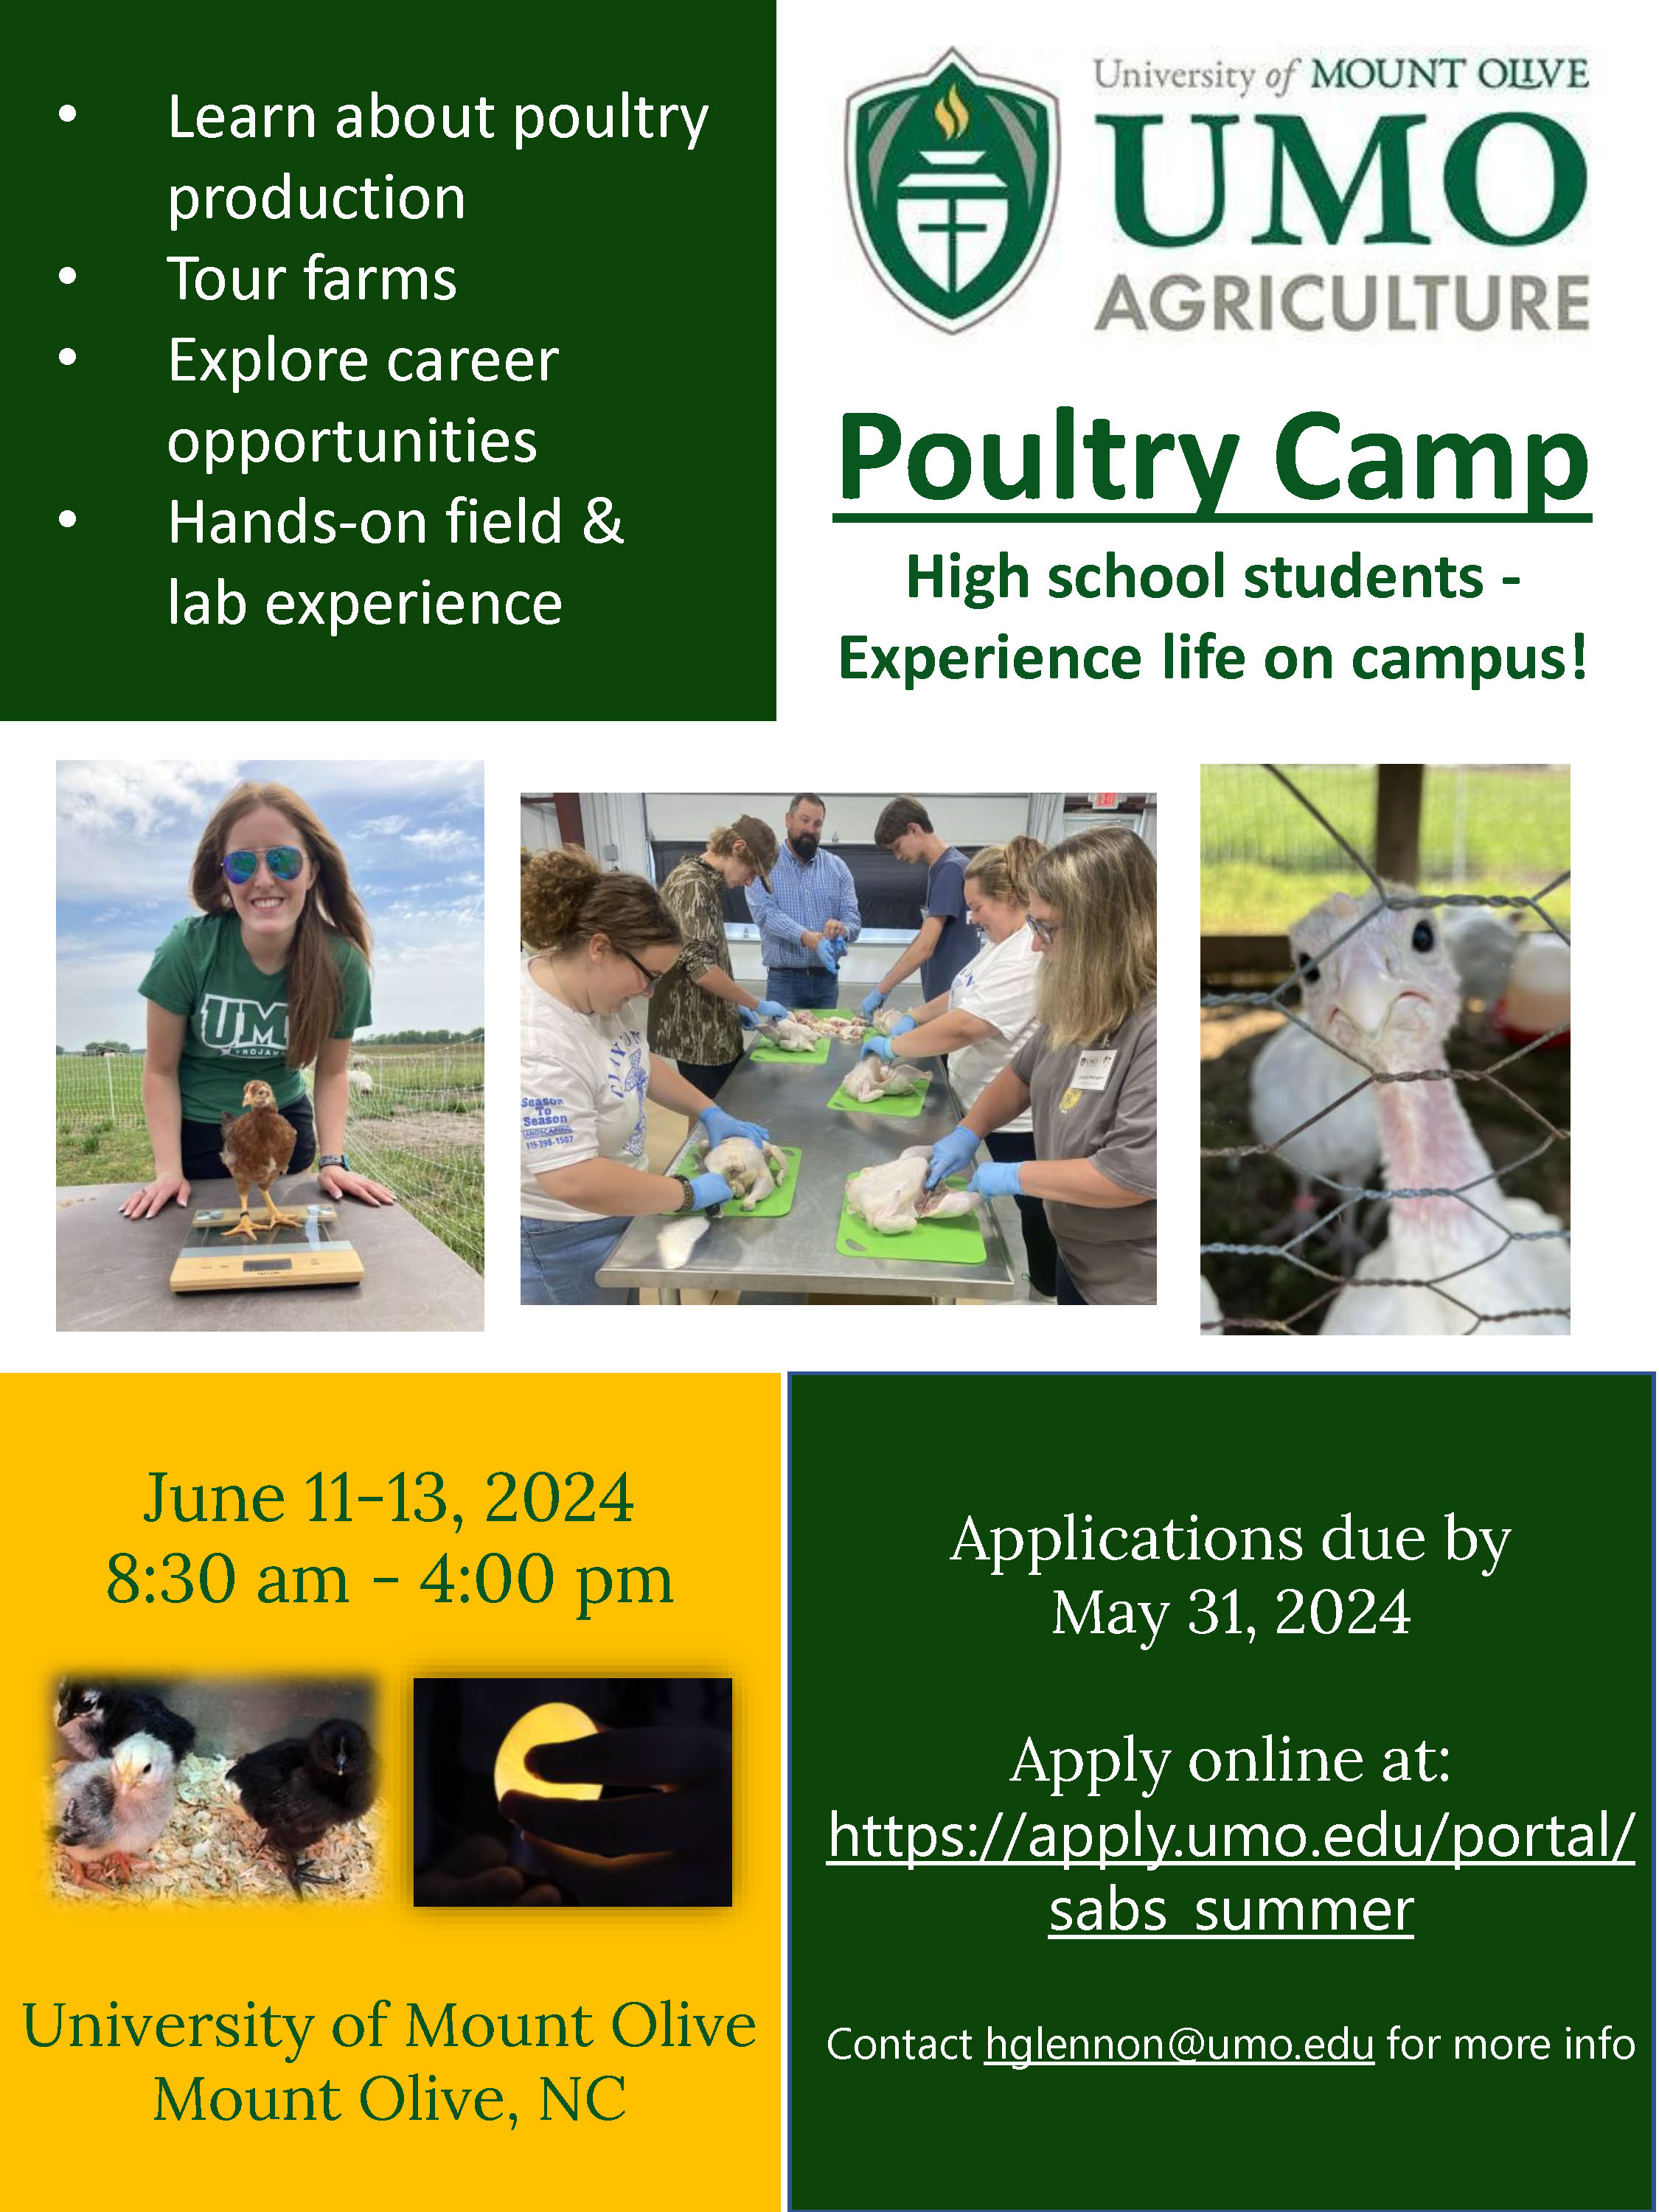 Learn about poultry production, tour farms, explore career opportunities, hands-on field and lab experience.